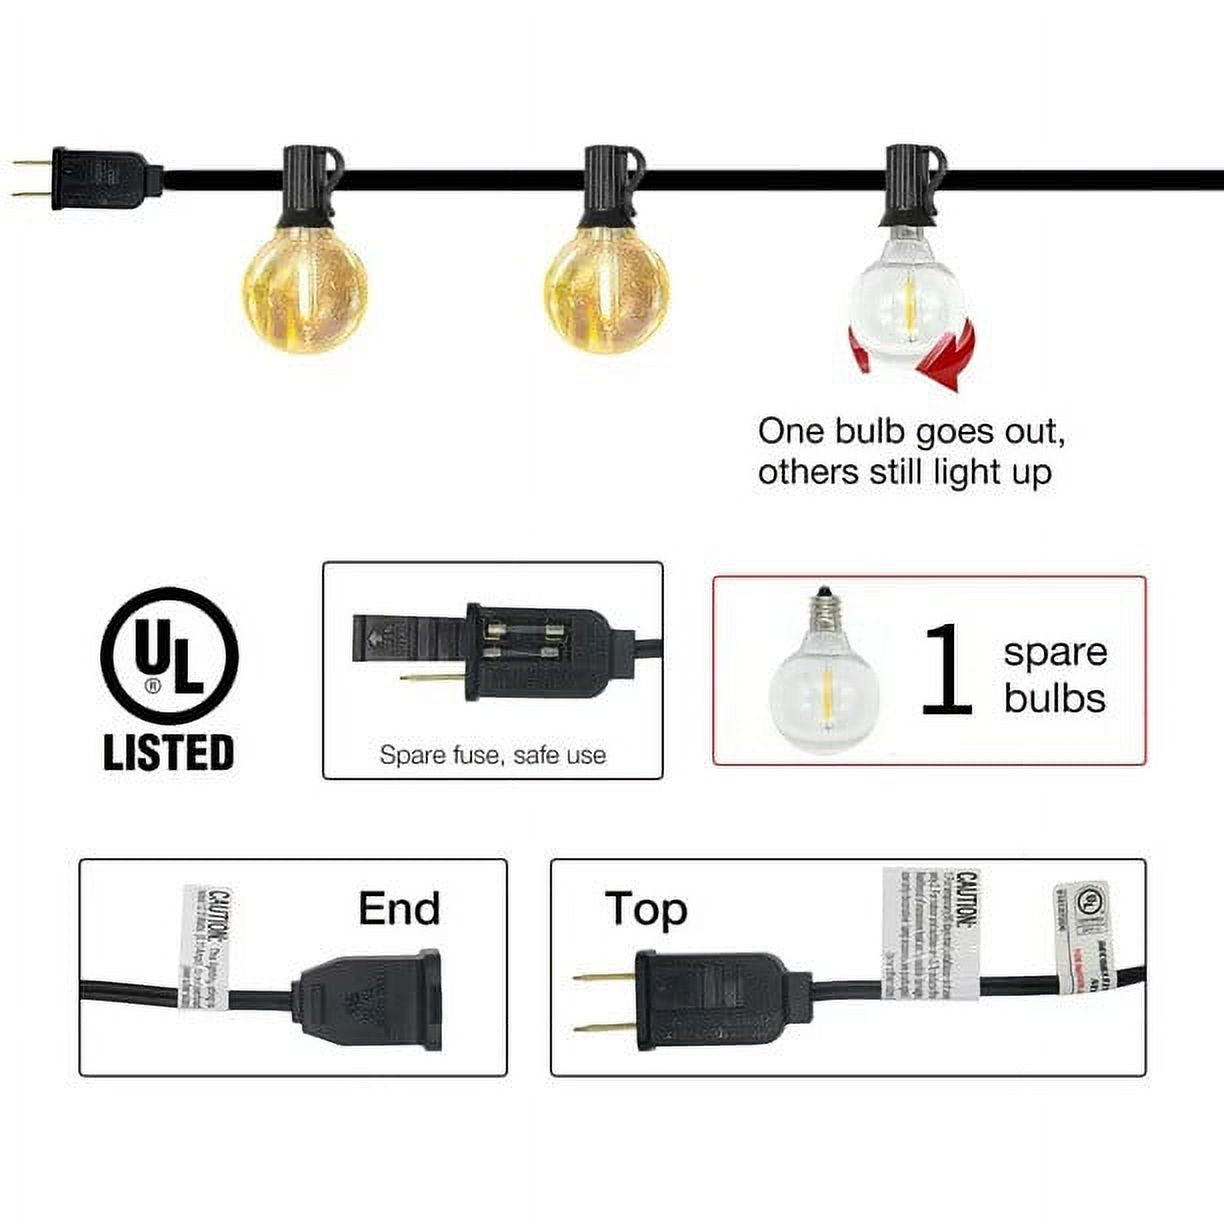 DAYBETTER Outdoor String Lights,100ft,with 50 G40 Edison Vintage Bulbs,Waterproof for Patio Garden Gazebo Bistro Cafe Backyard - image 4 of 10